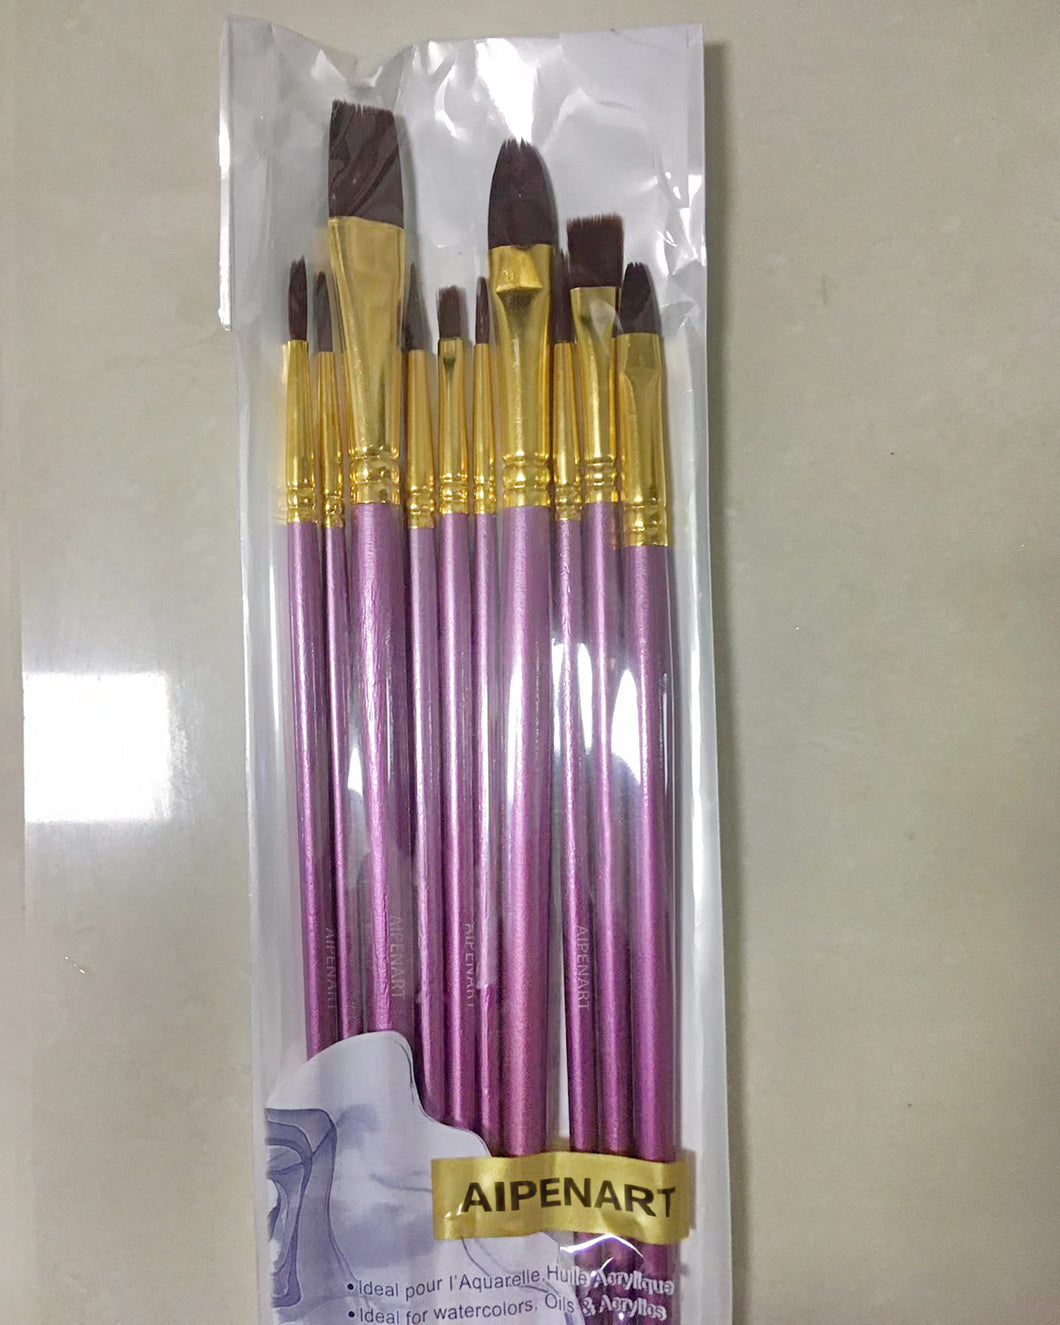 AIPENART-Paint brushes,Kids Adult Drawing Arts Crafts Supplies